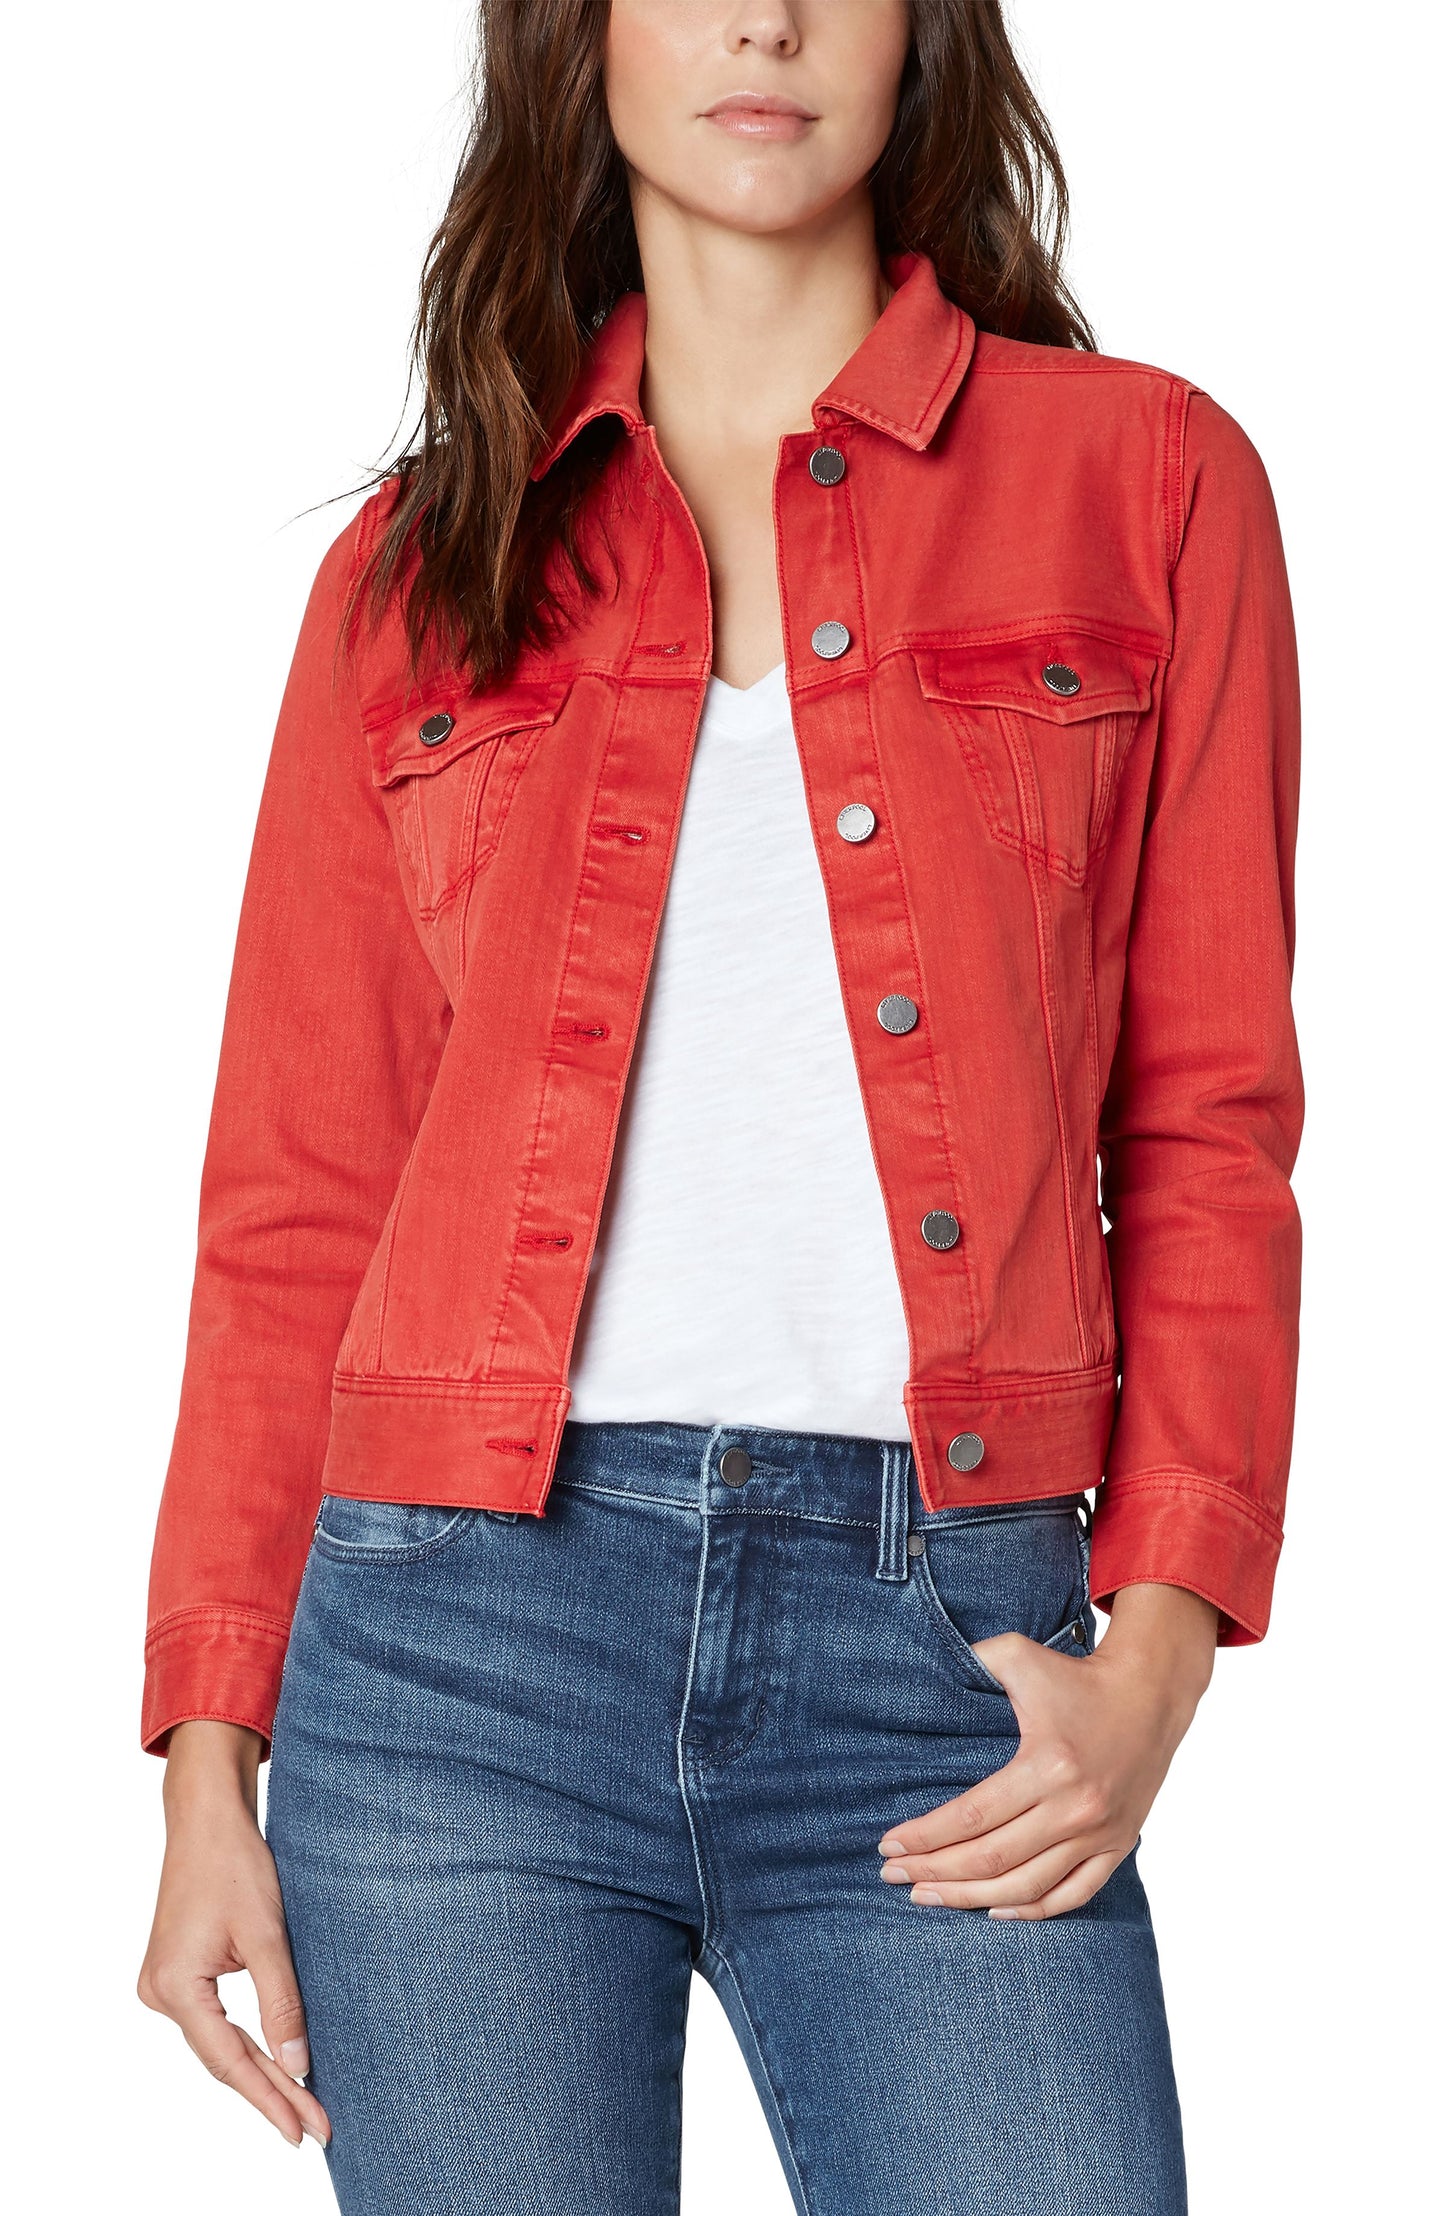 Liverpool Classic Jean Jacket (variety of colors)